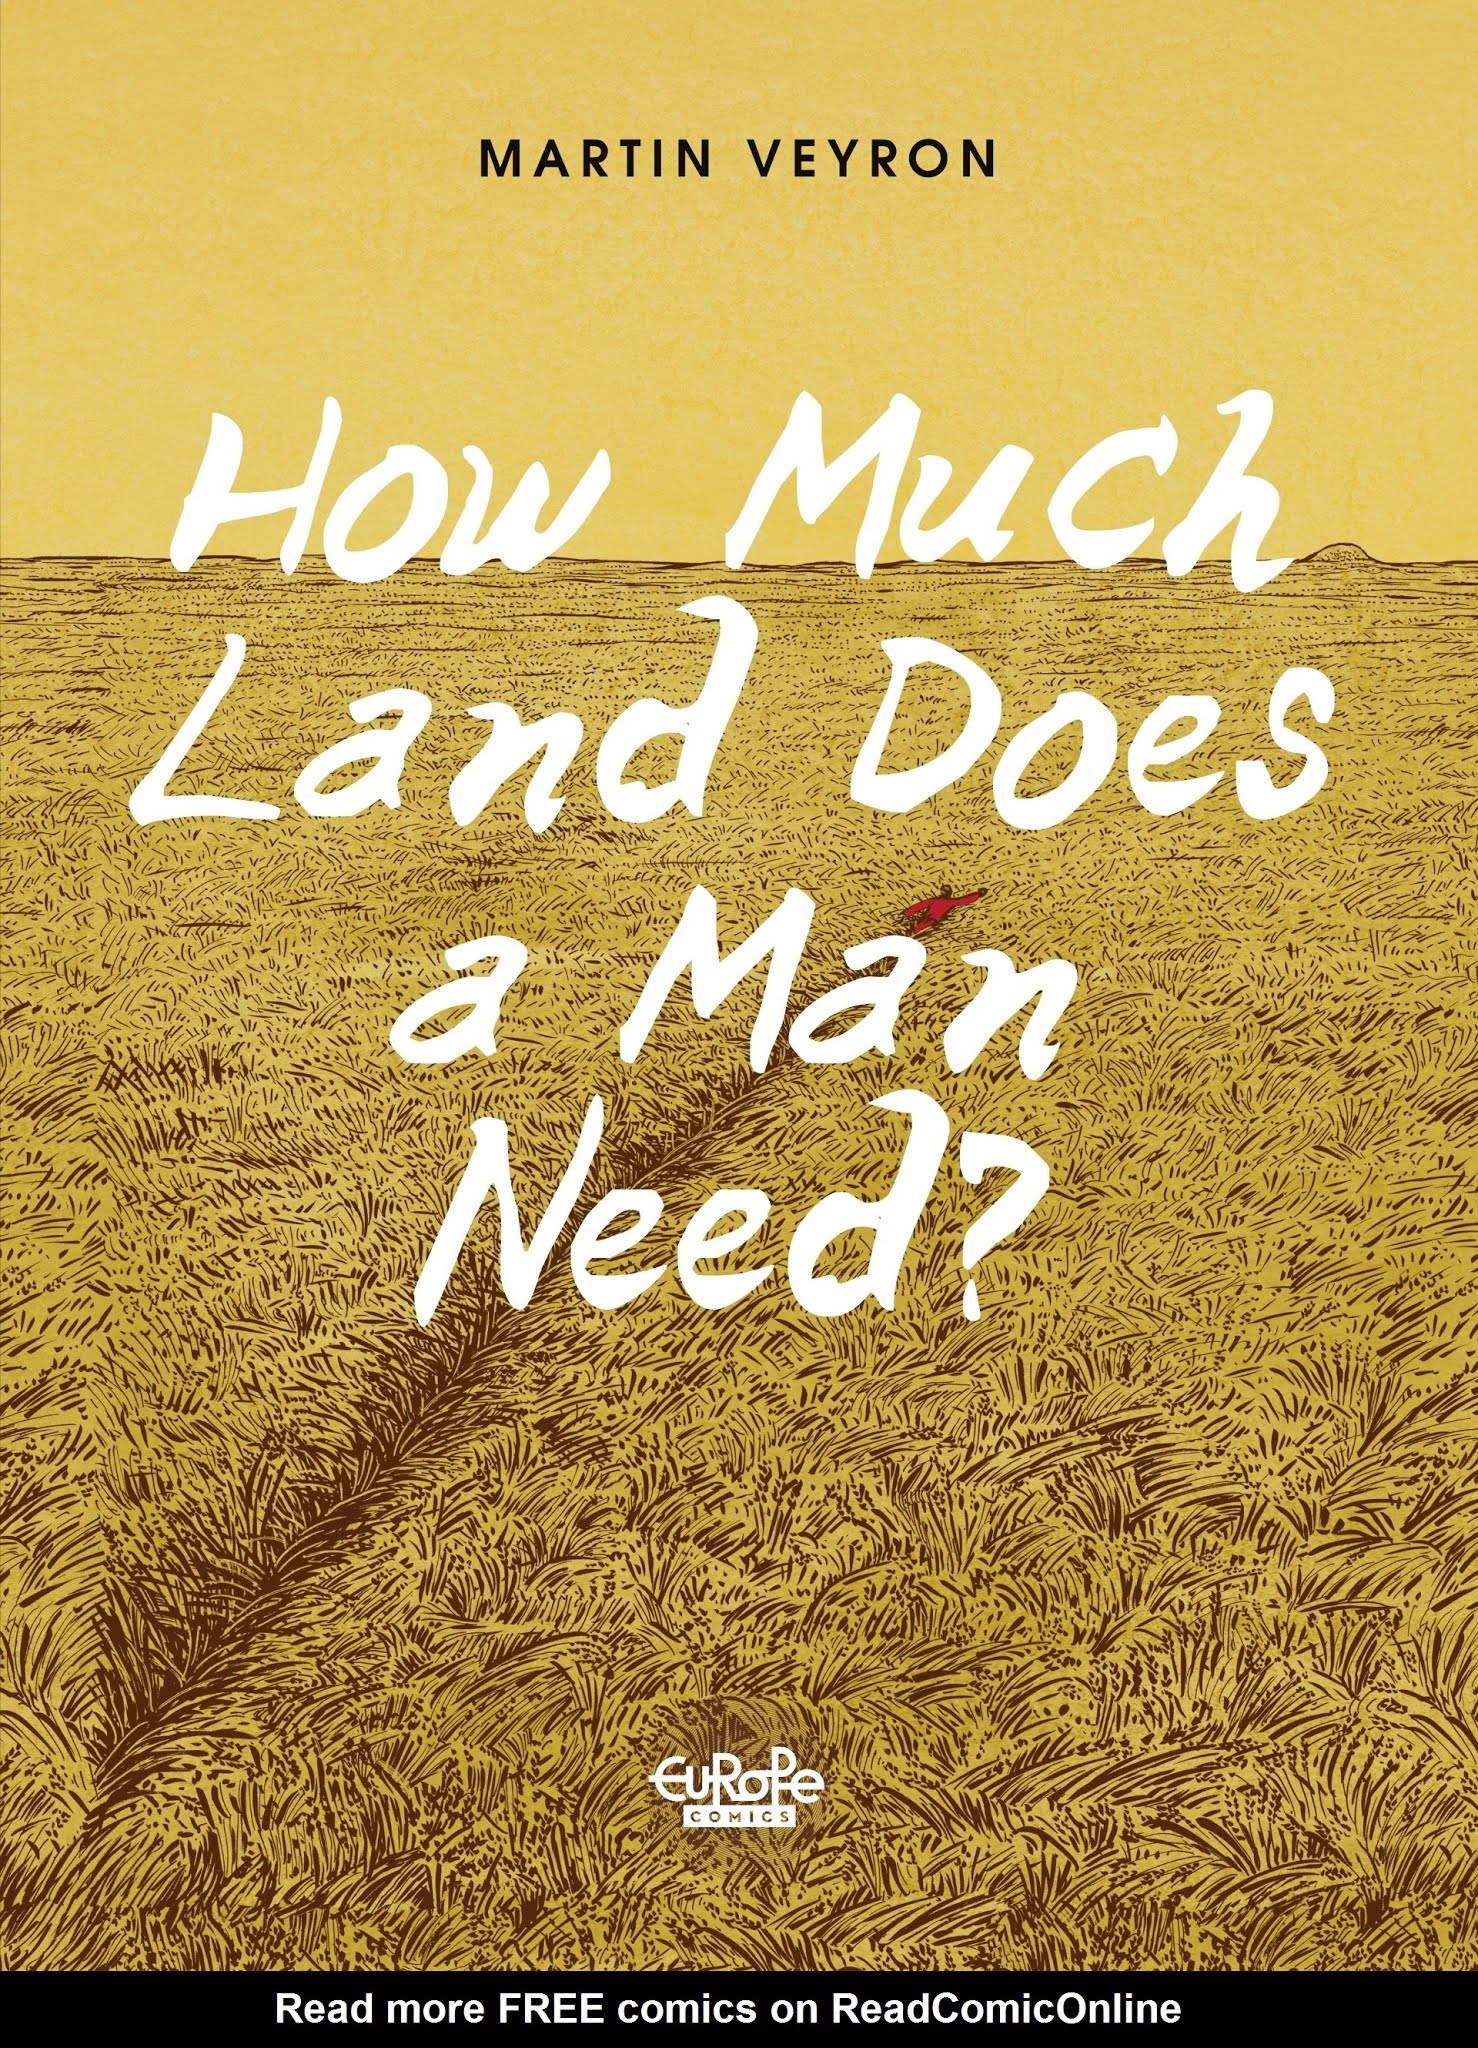 Read online How Much Land Does A Man Need? comic -  Issue # TPB - 1